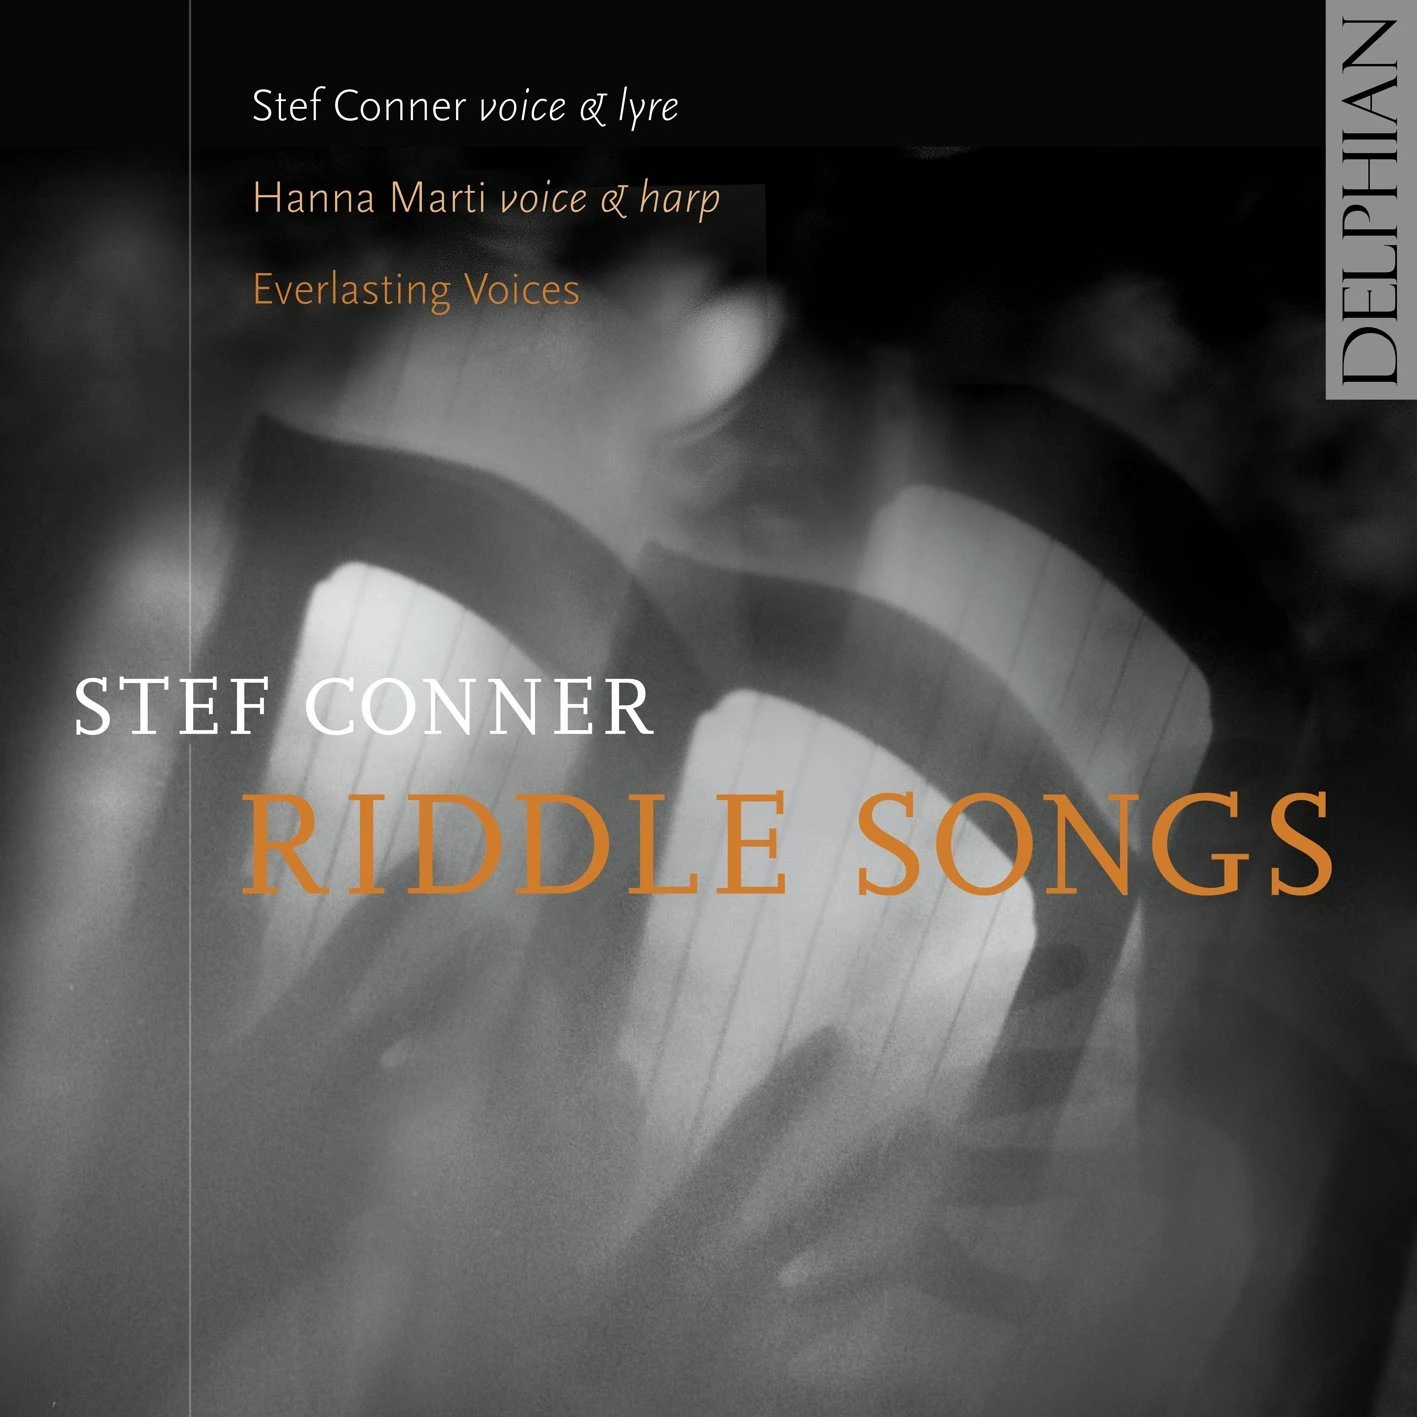 Album cover for Stef Conner’s “Riddle Songs”.